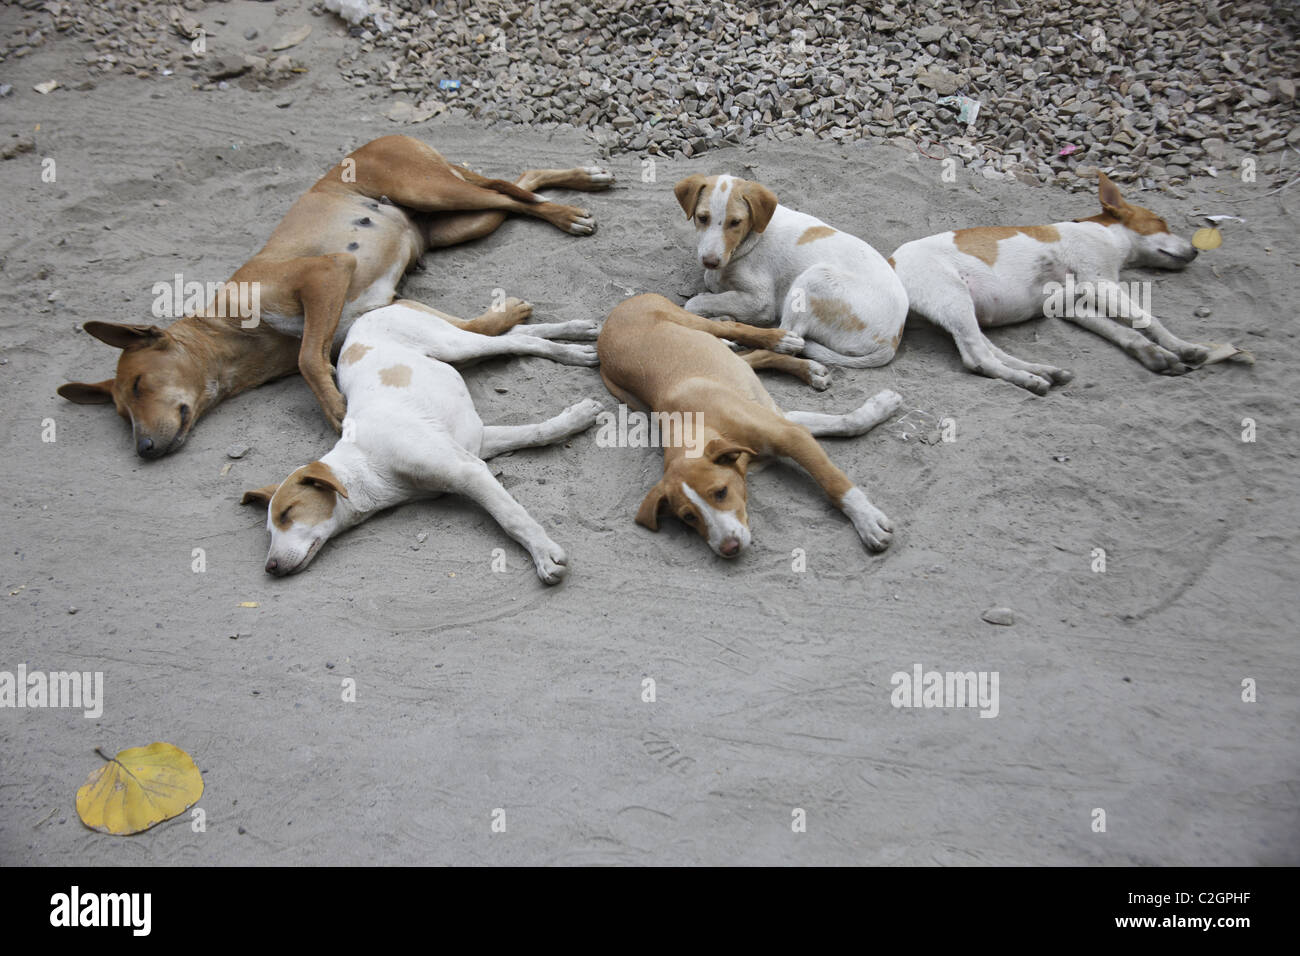 IND, India,20110310, pack of dogs Stock Photo